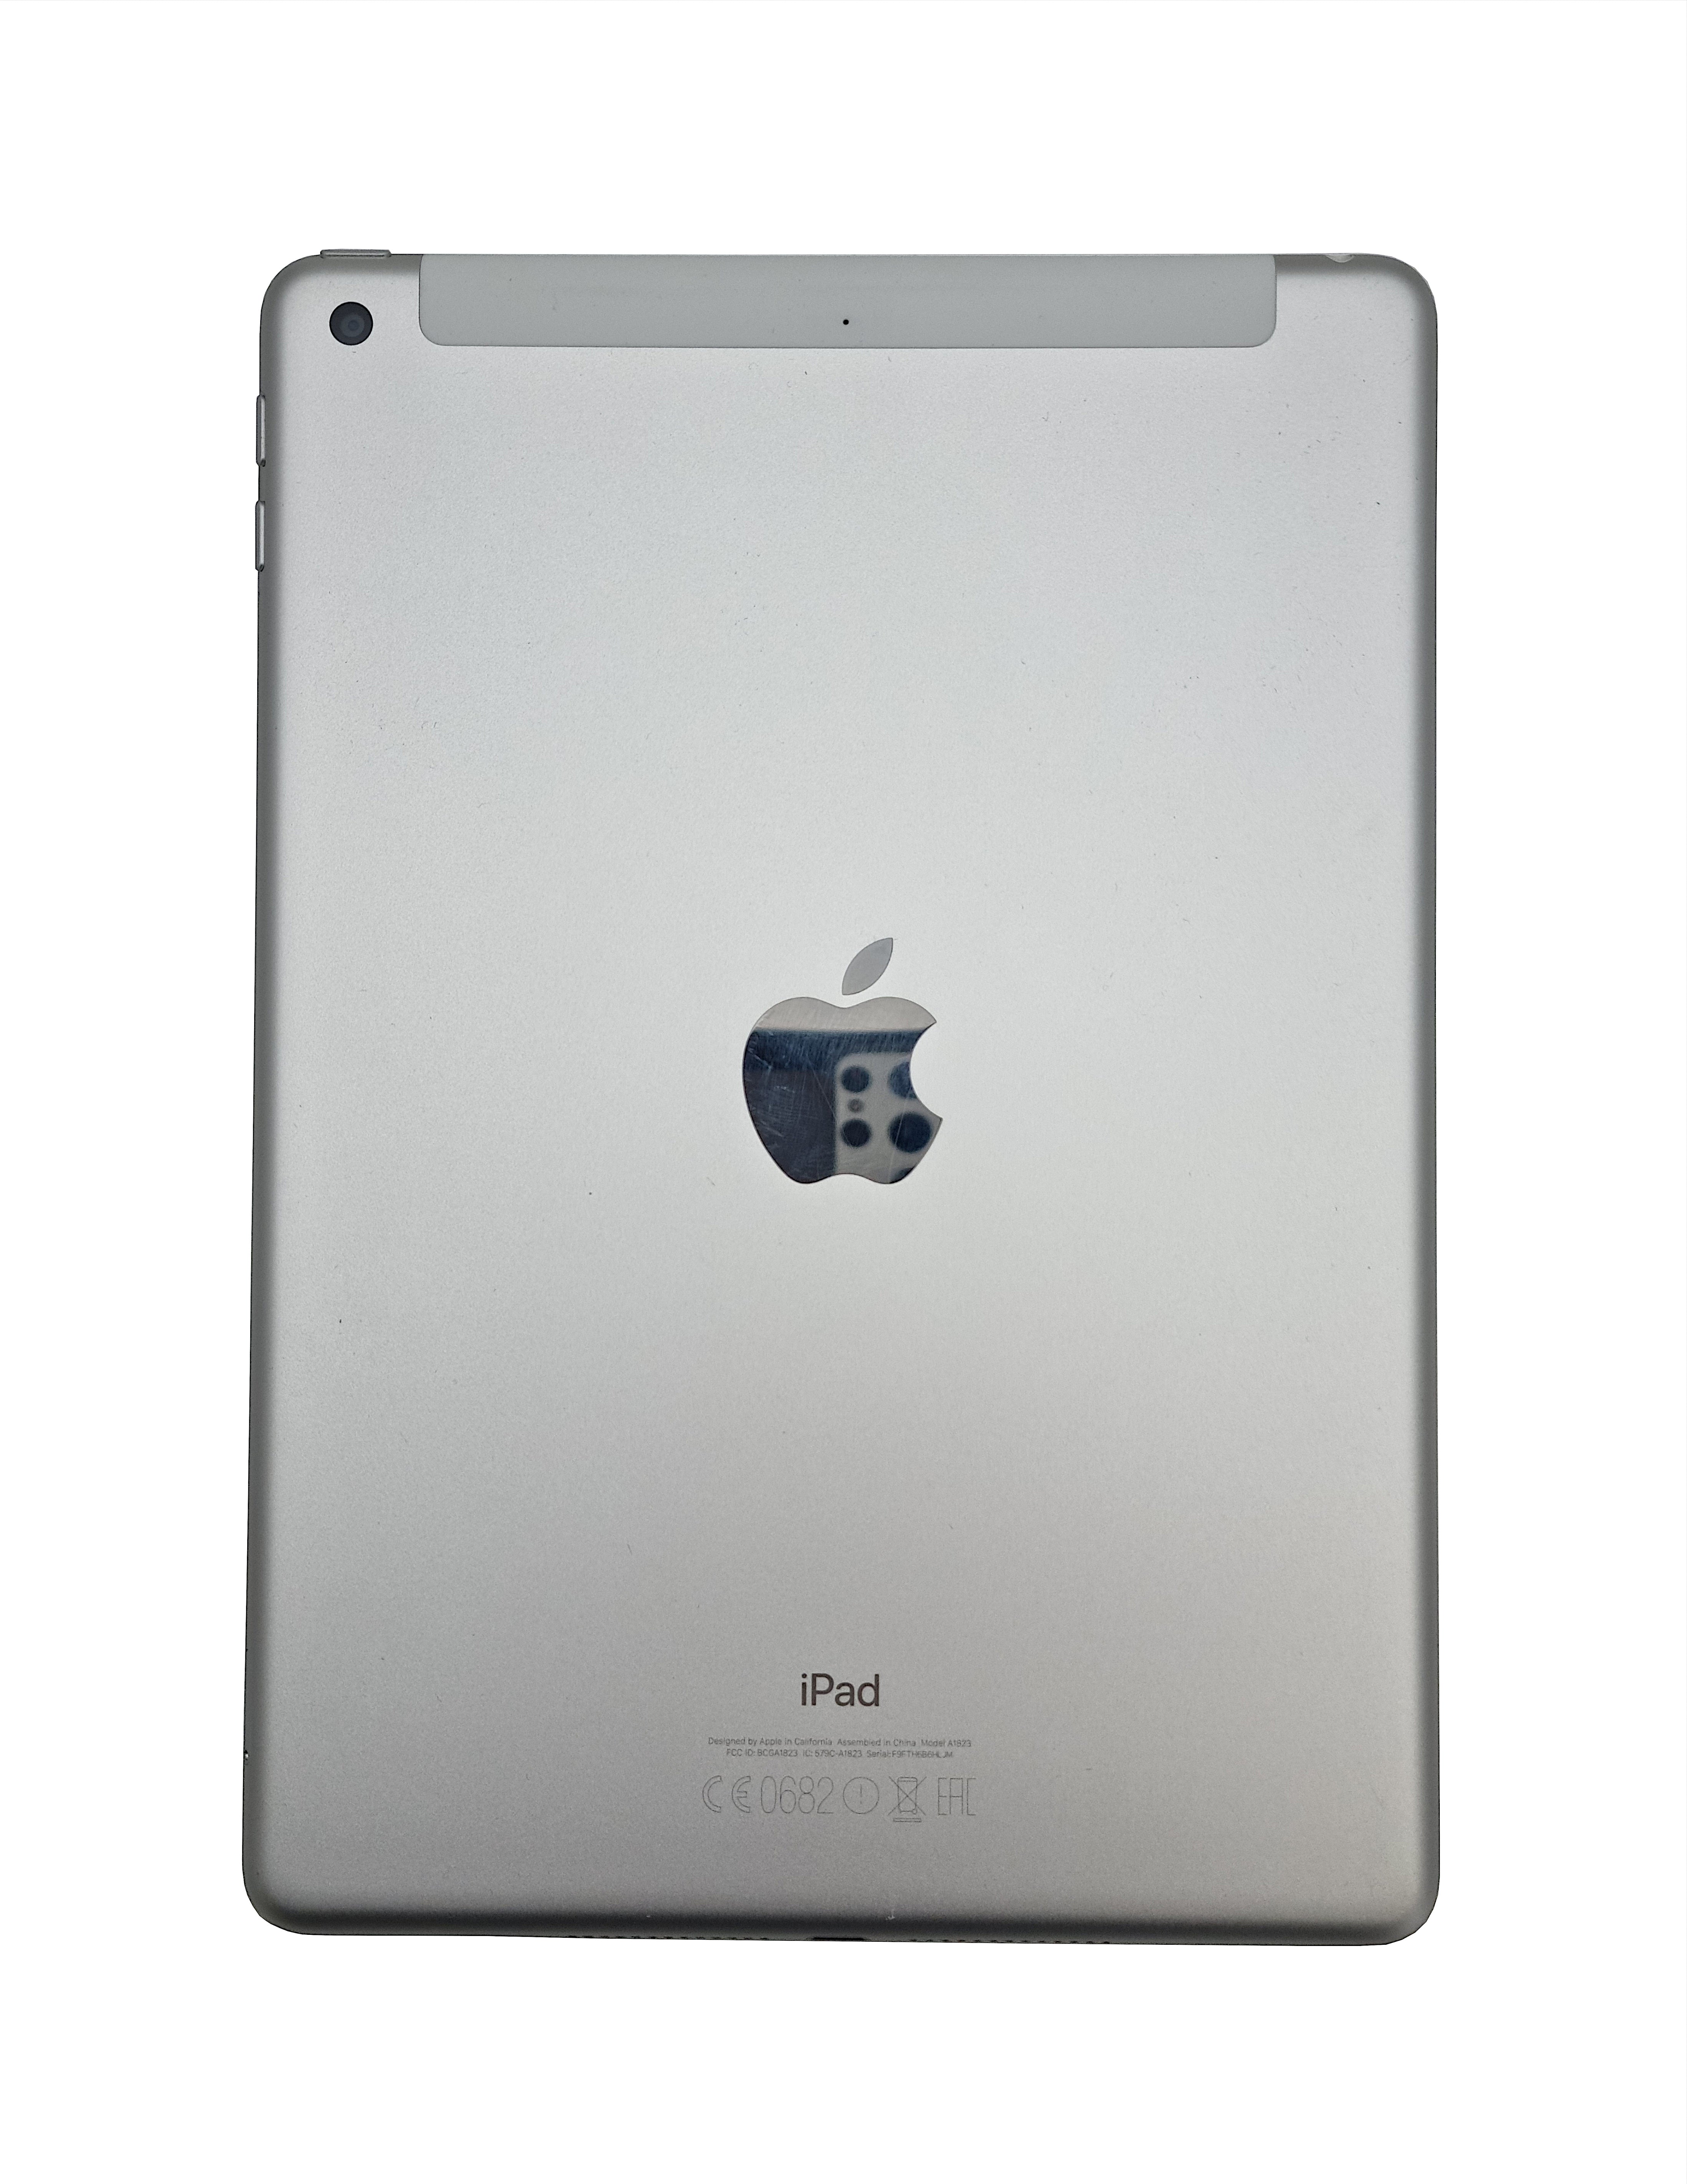 Apple Ipad 5th Generation Tablet, WiFi and Cellular, 128GB, Silver, A1823